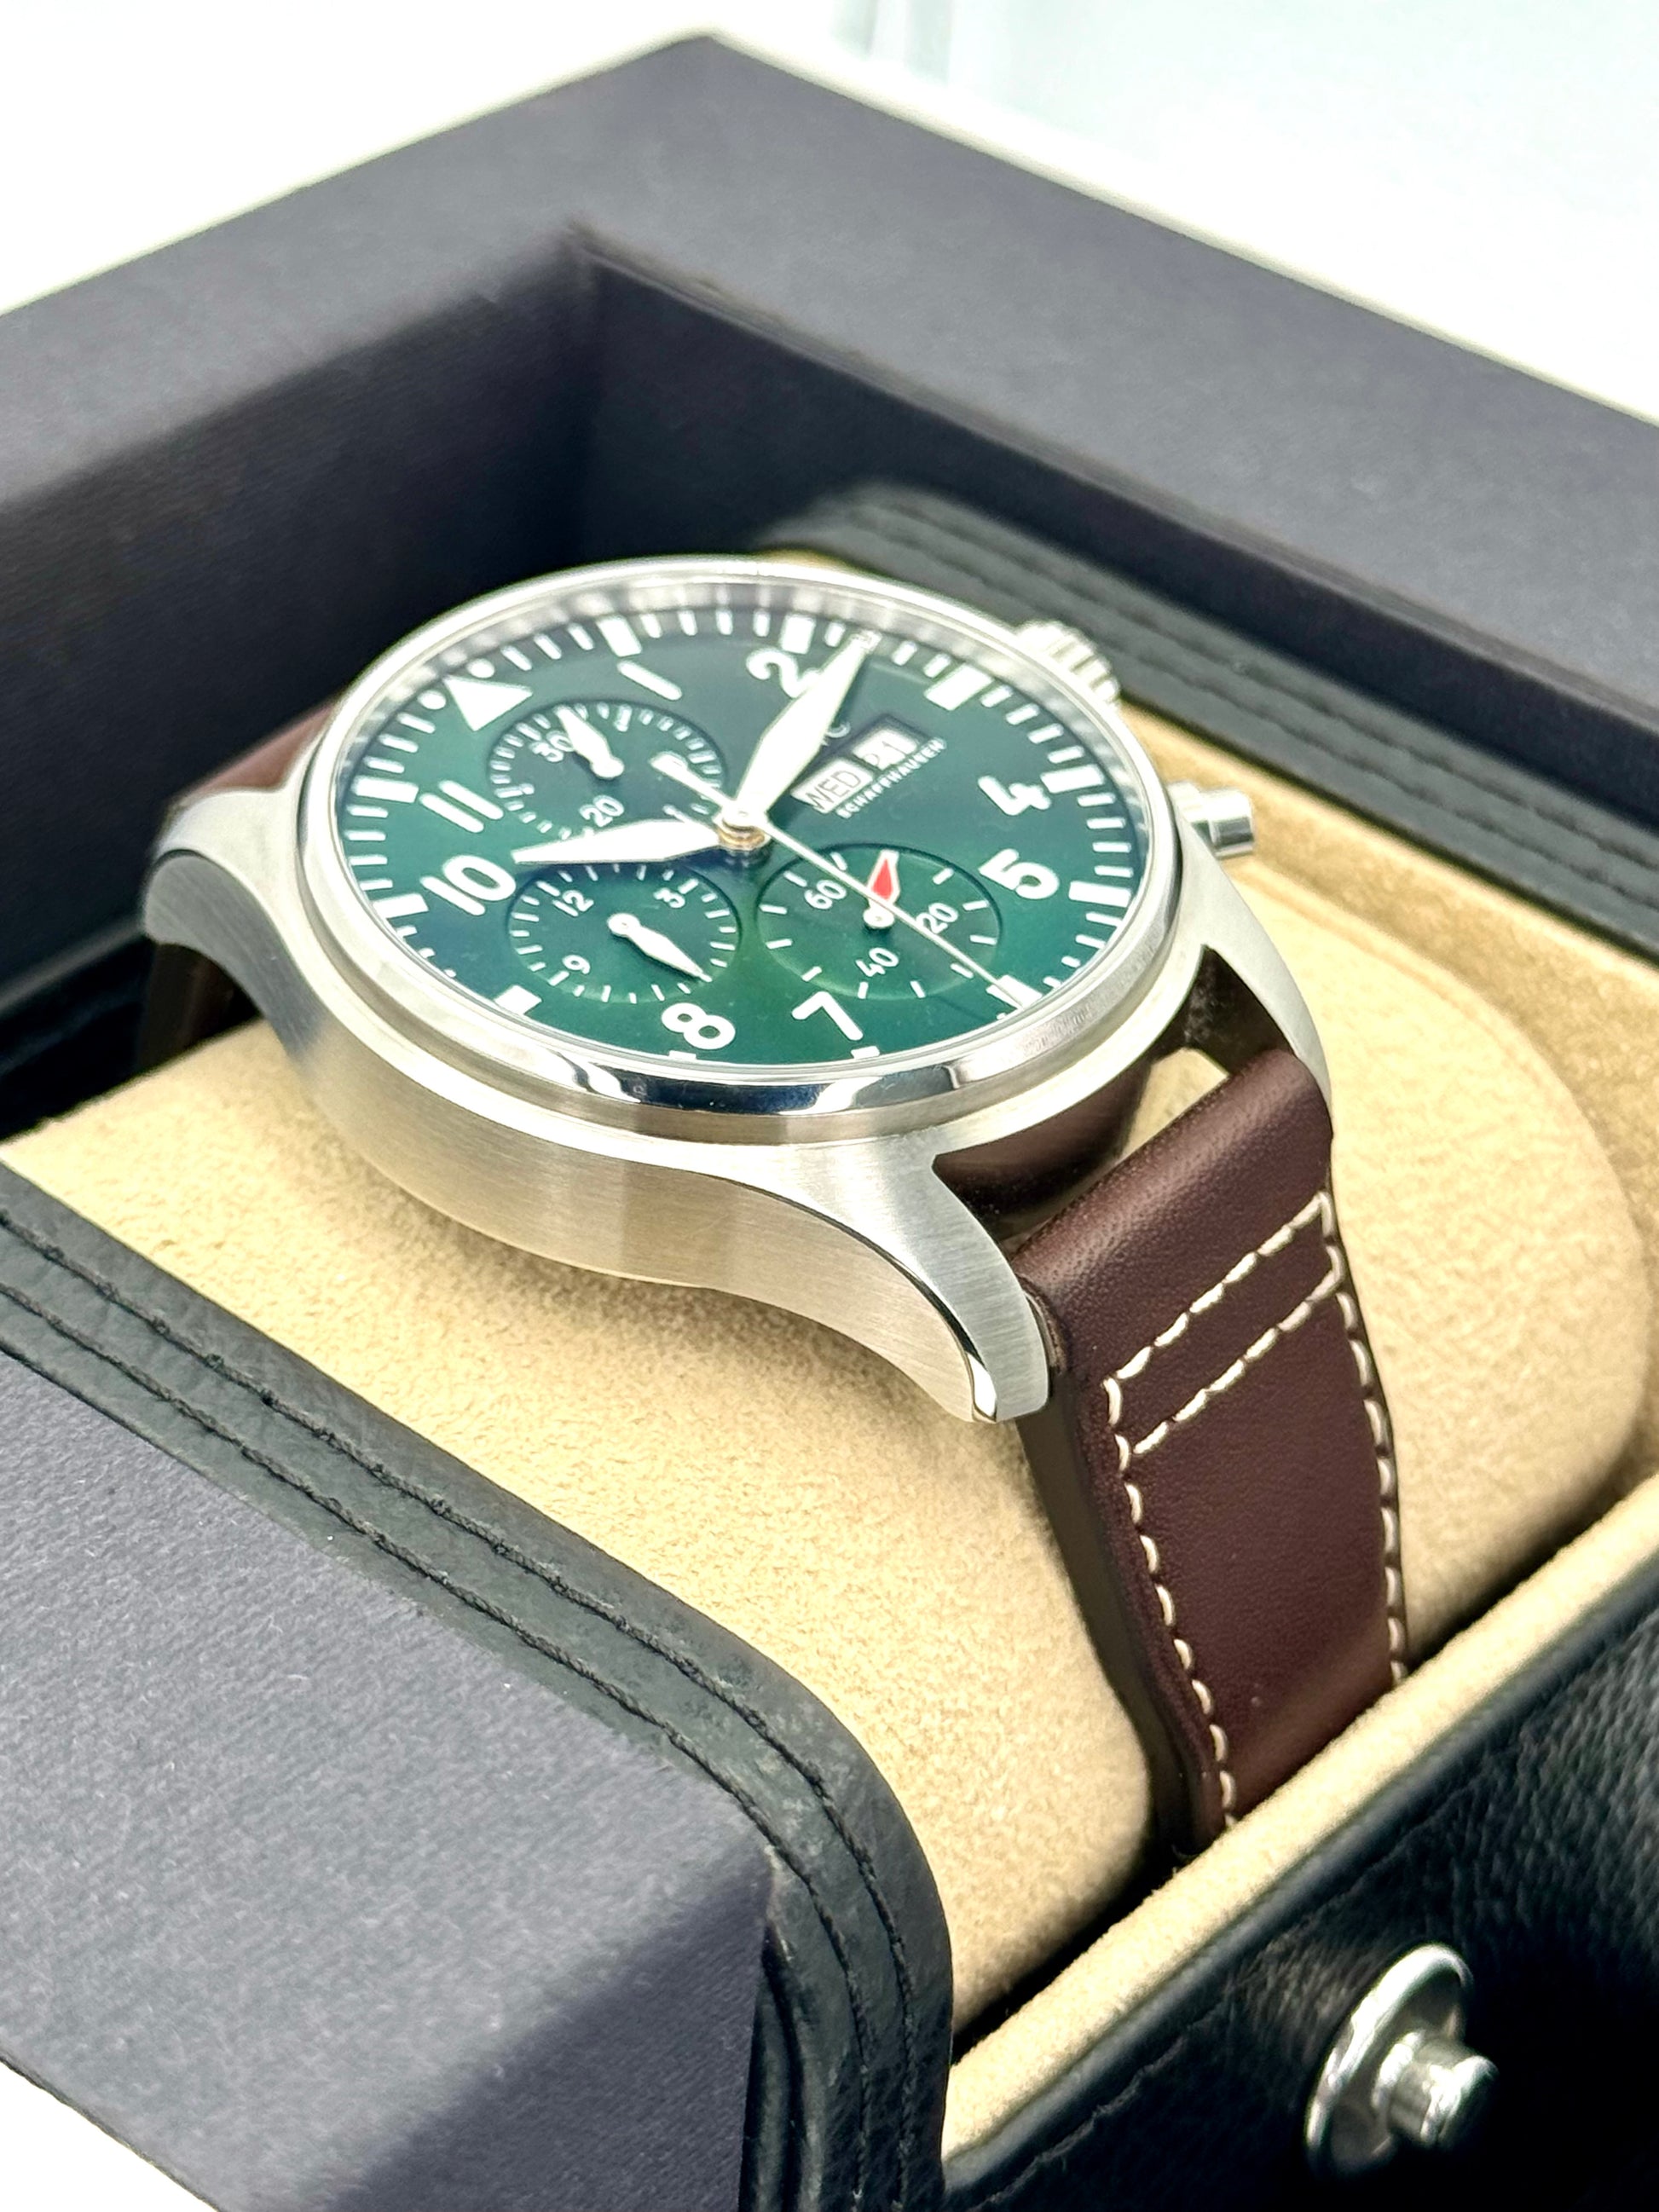 2023 IWC Pilot's Watch Chronograph 43mm IW378005 Steel Green Dial - MyWatchLLC